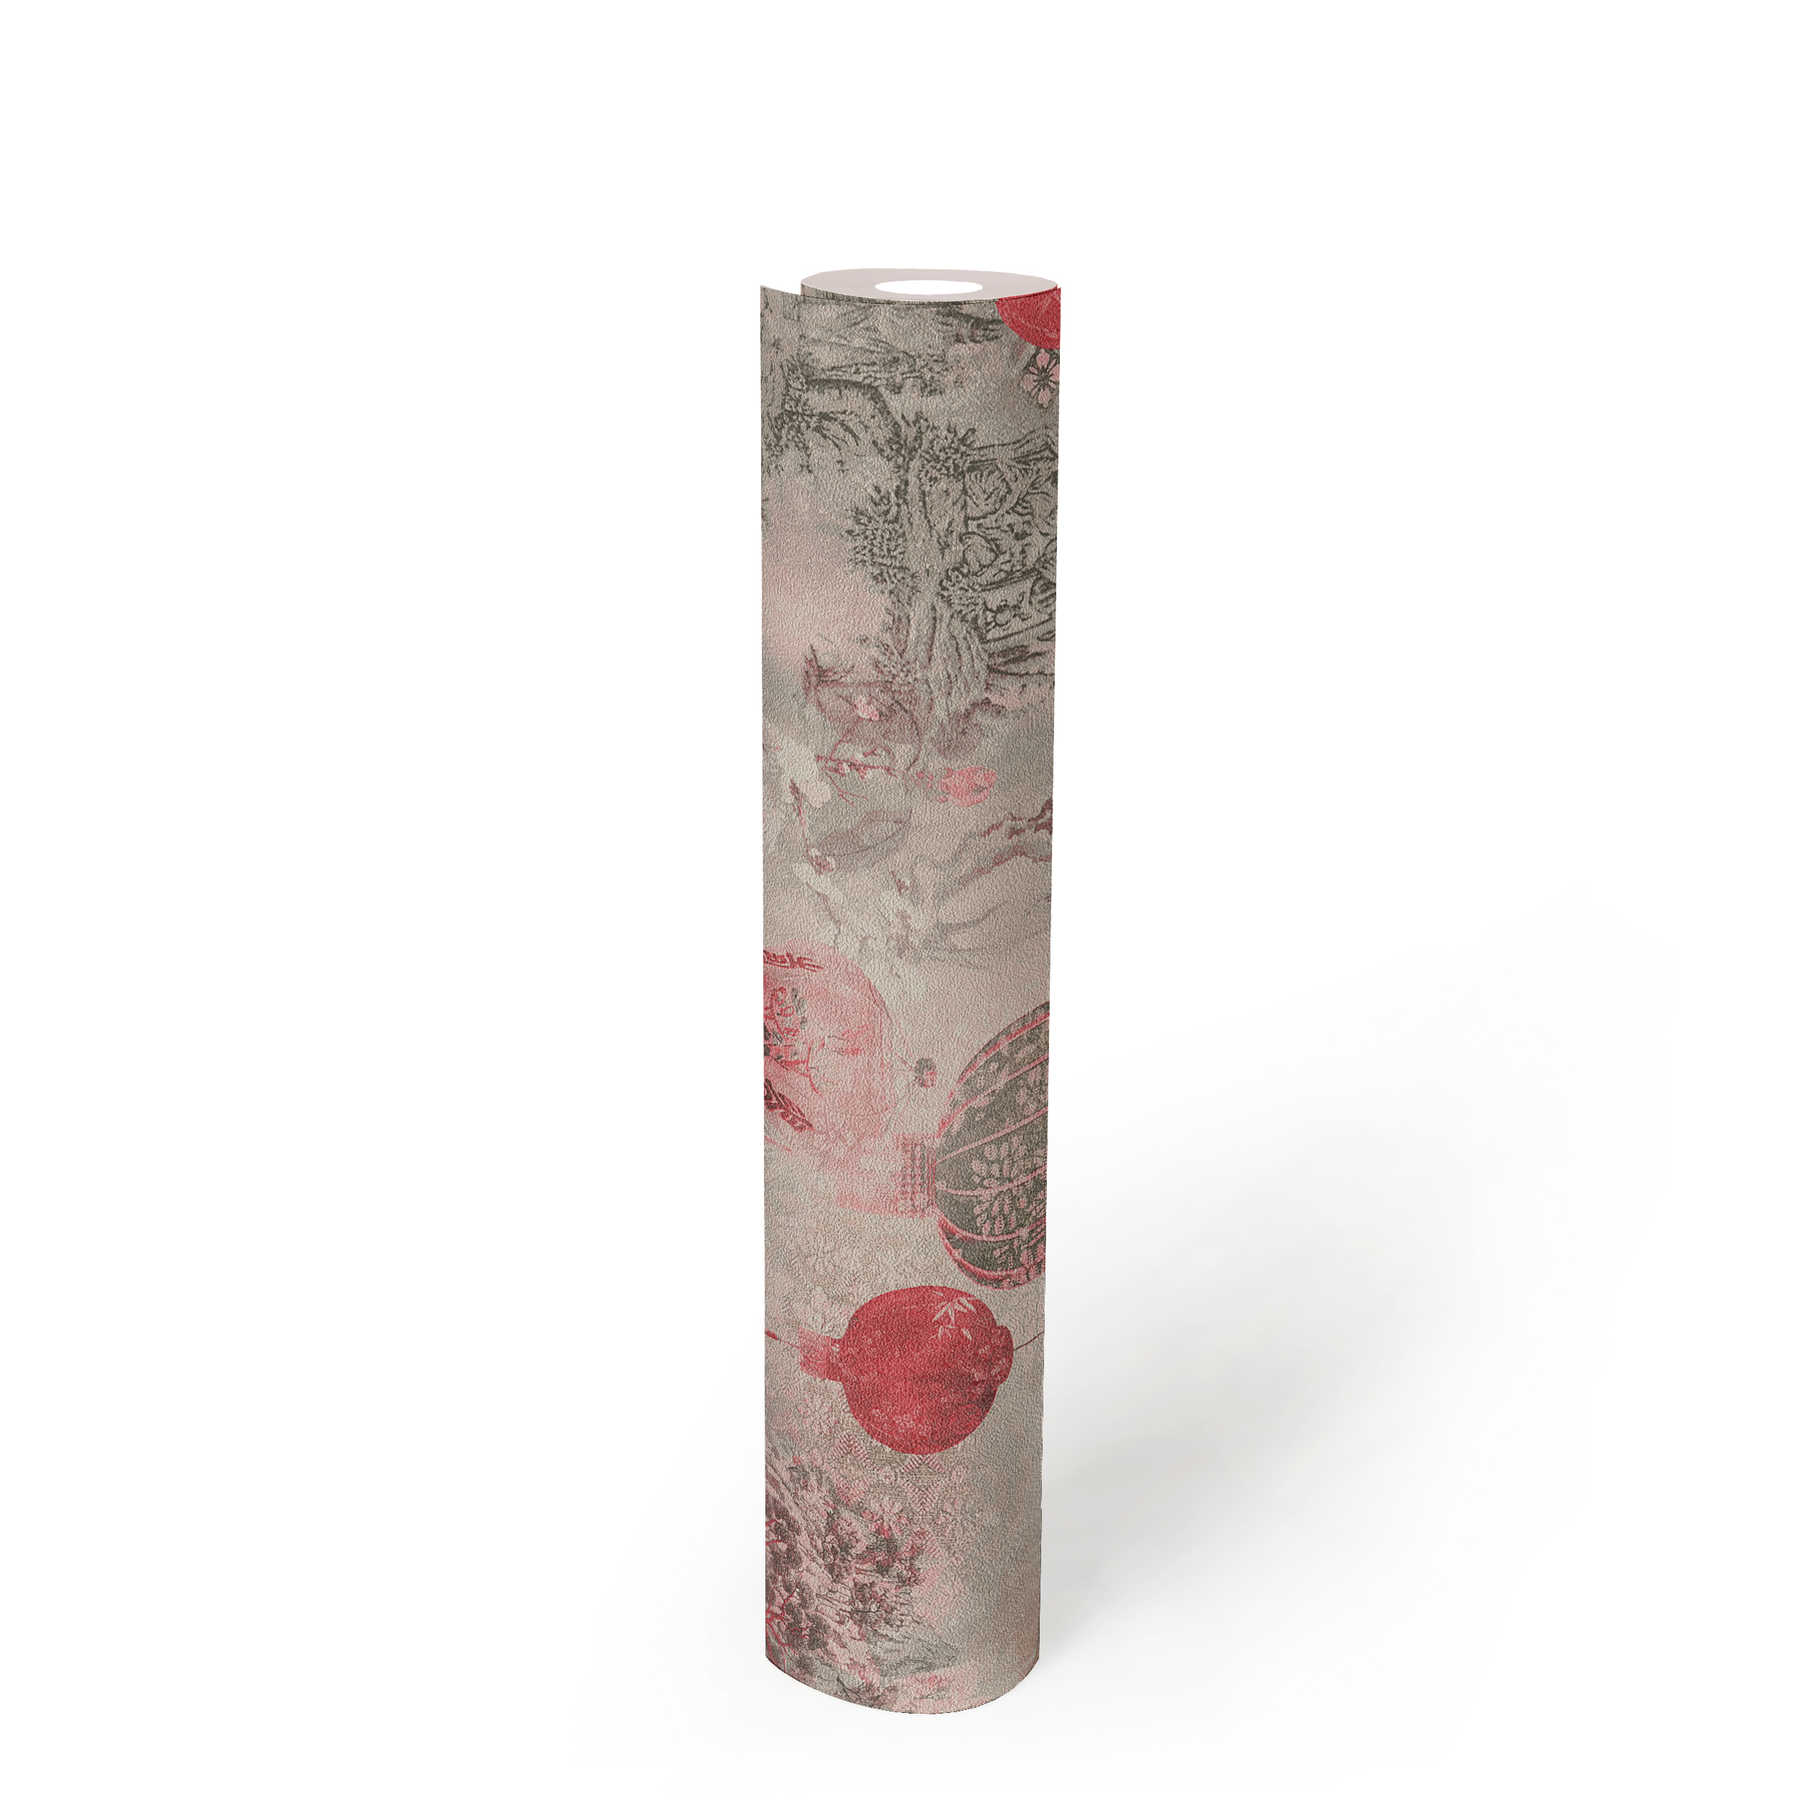             Non-woven wallpaper with landscape motif and Asian decor - grey, red, pink
        